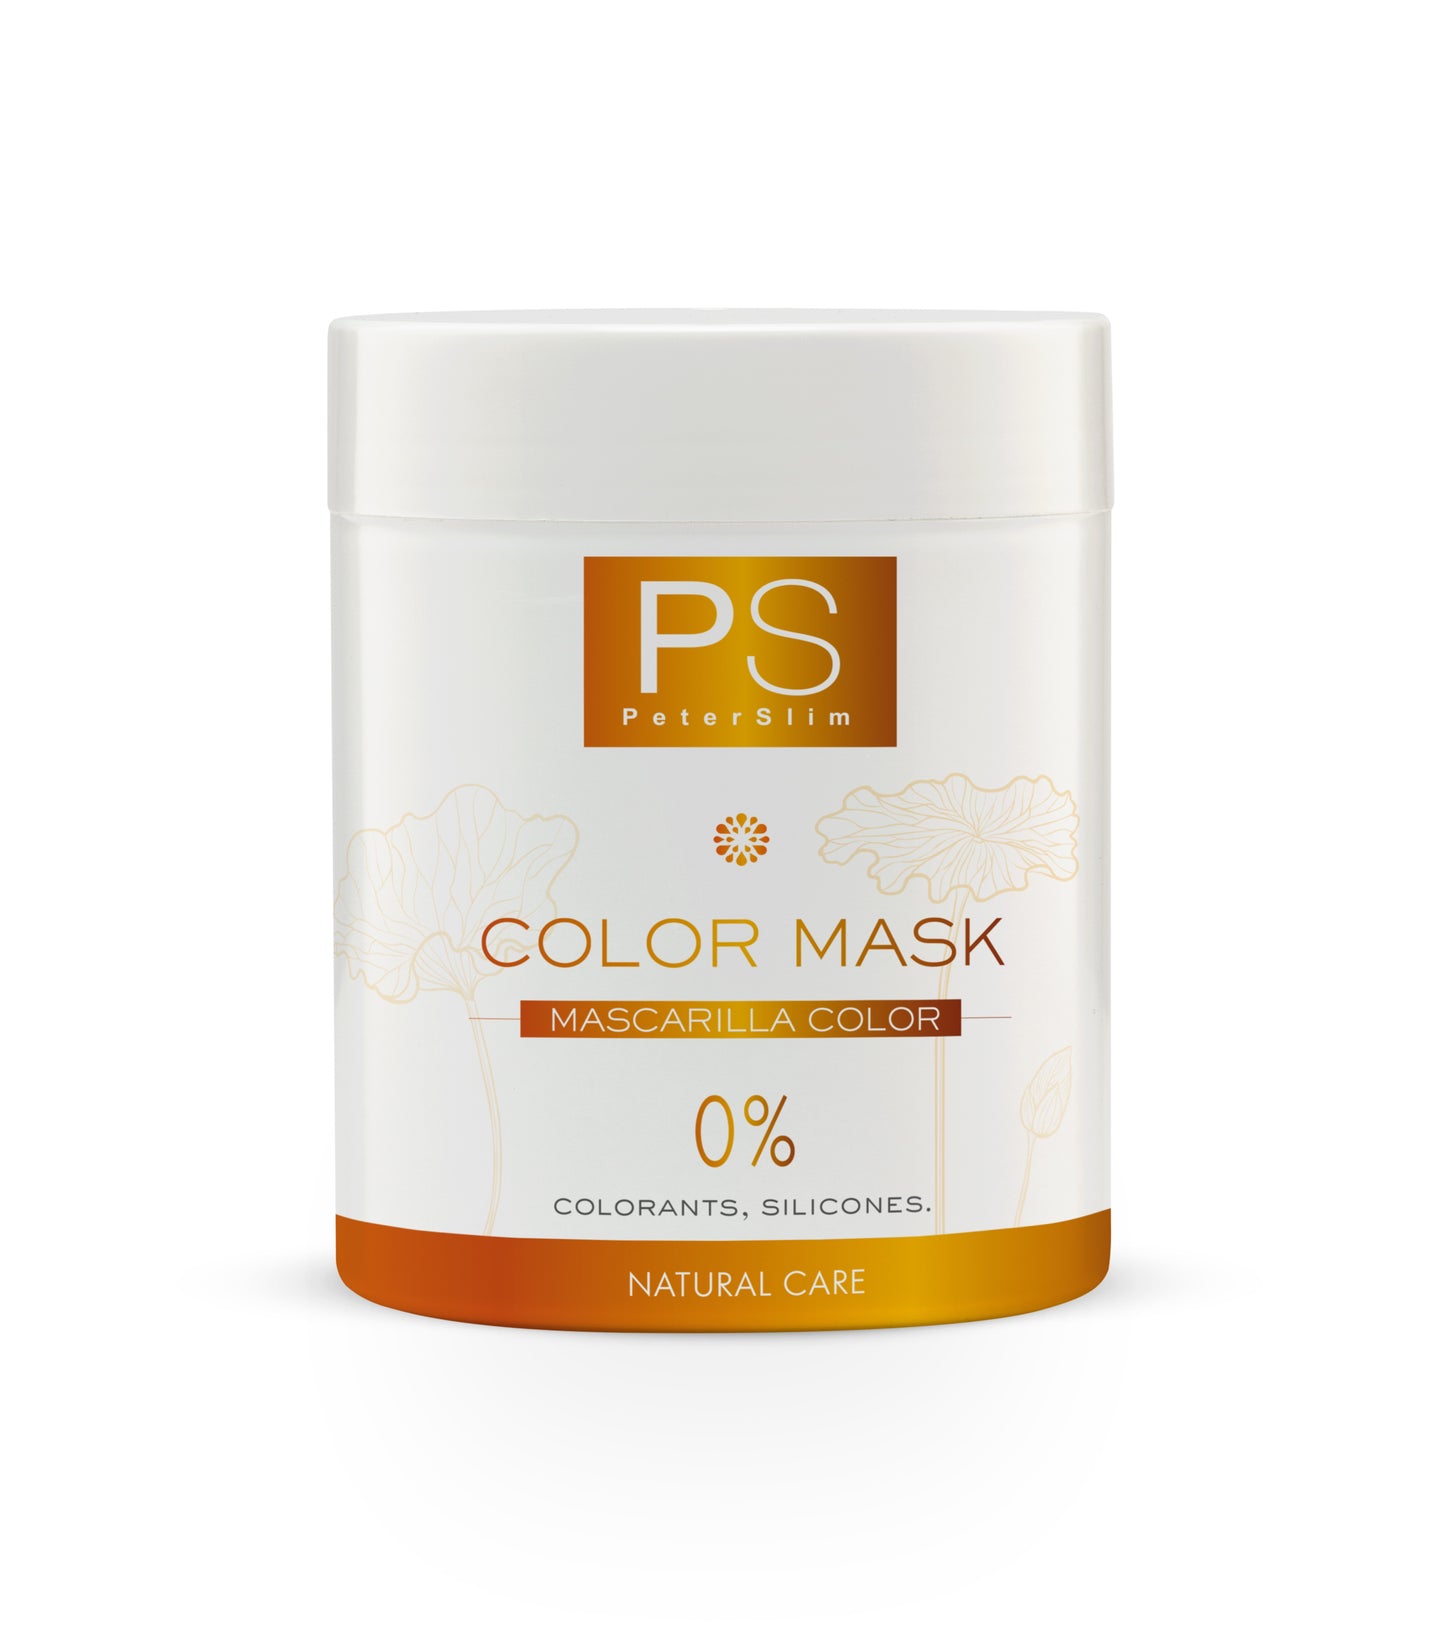 PS Color Mask